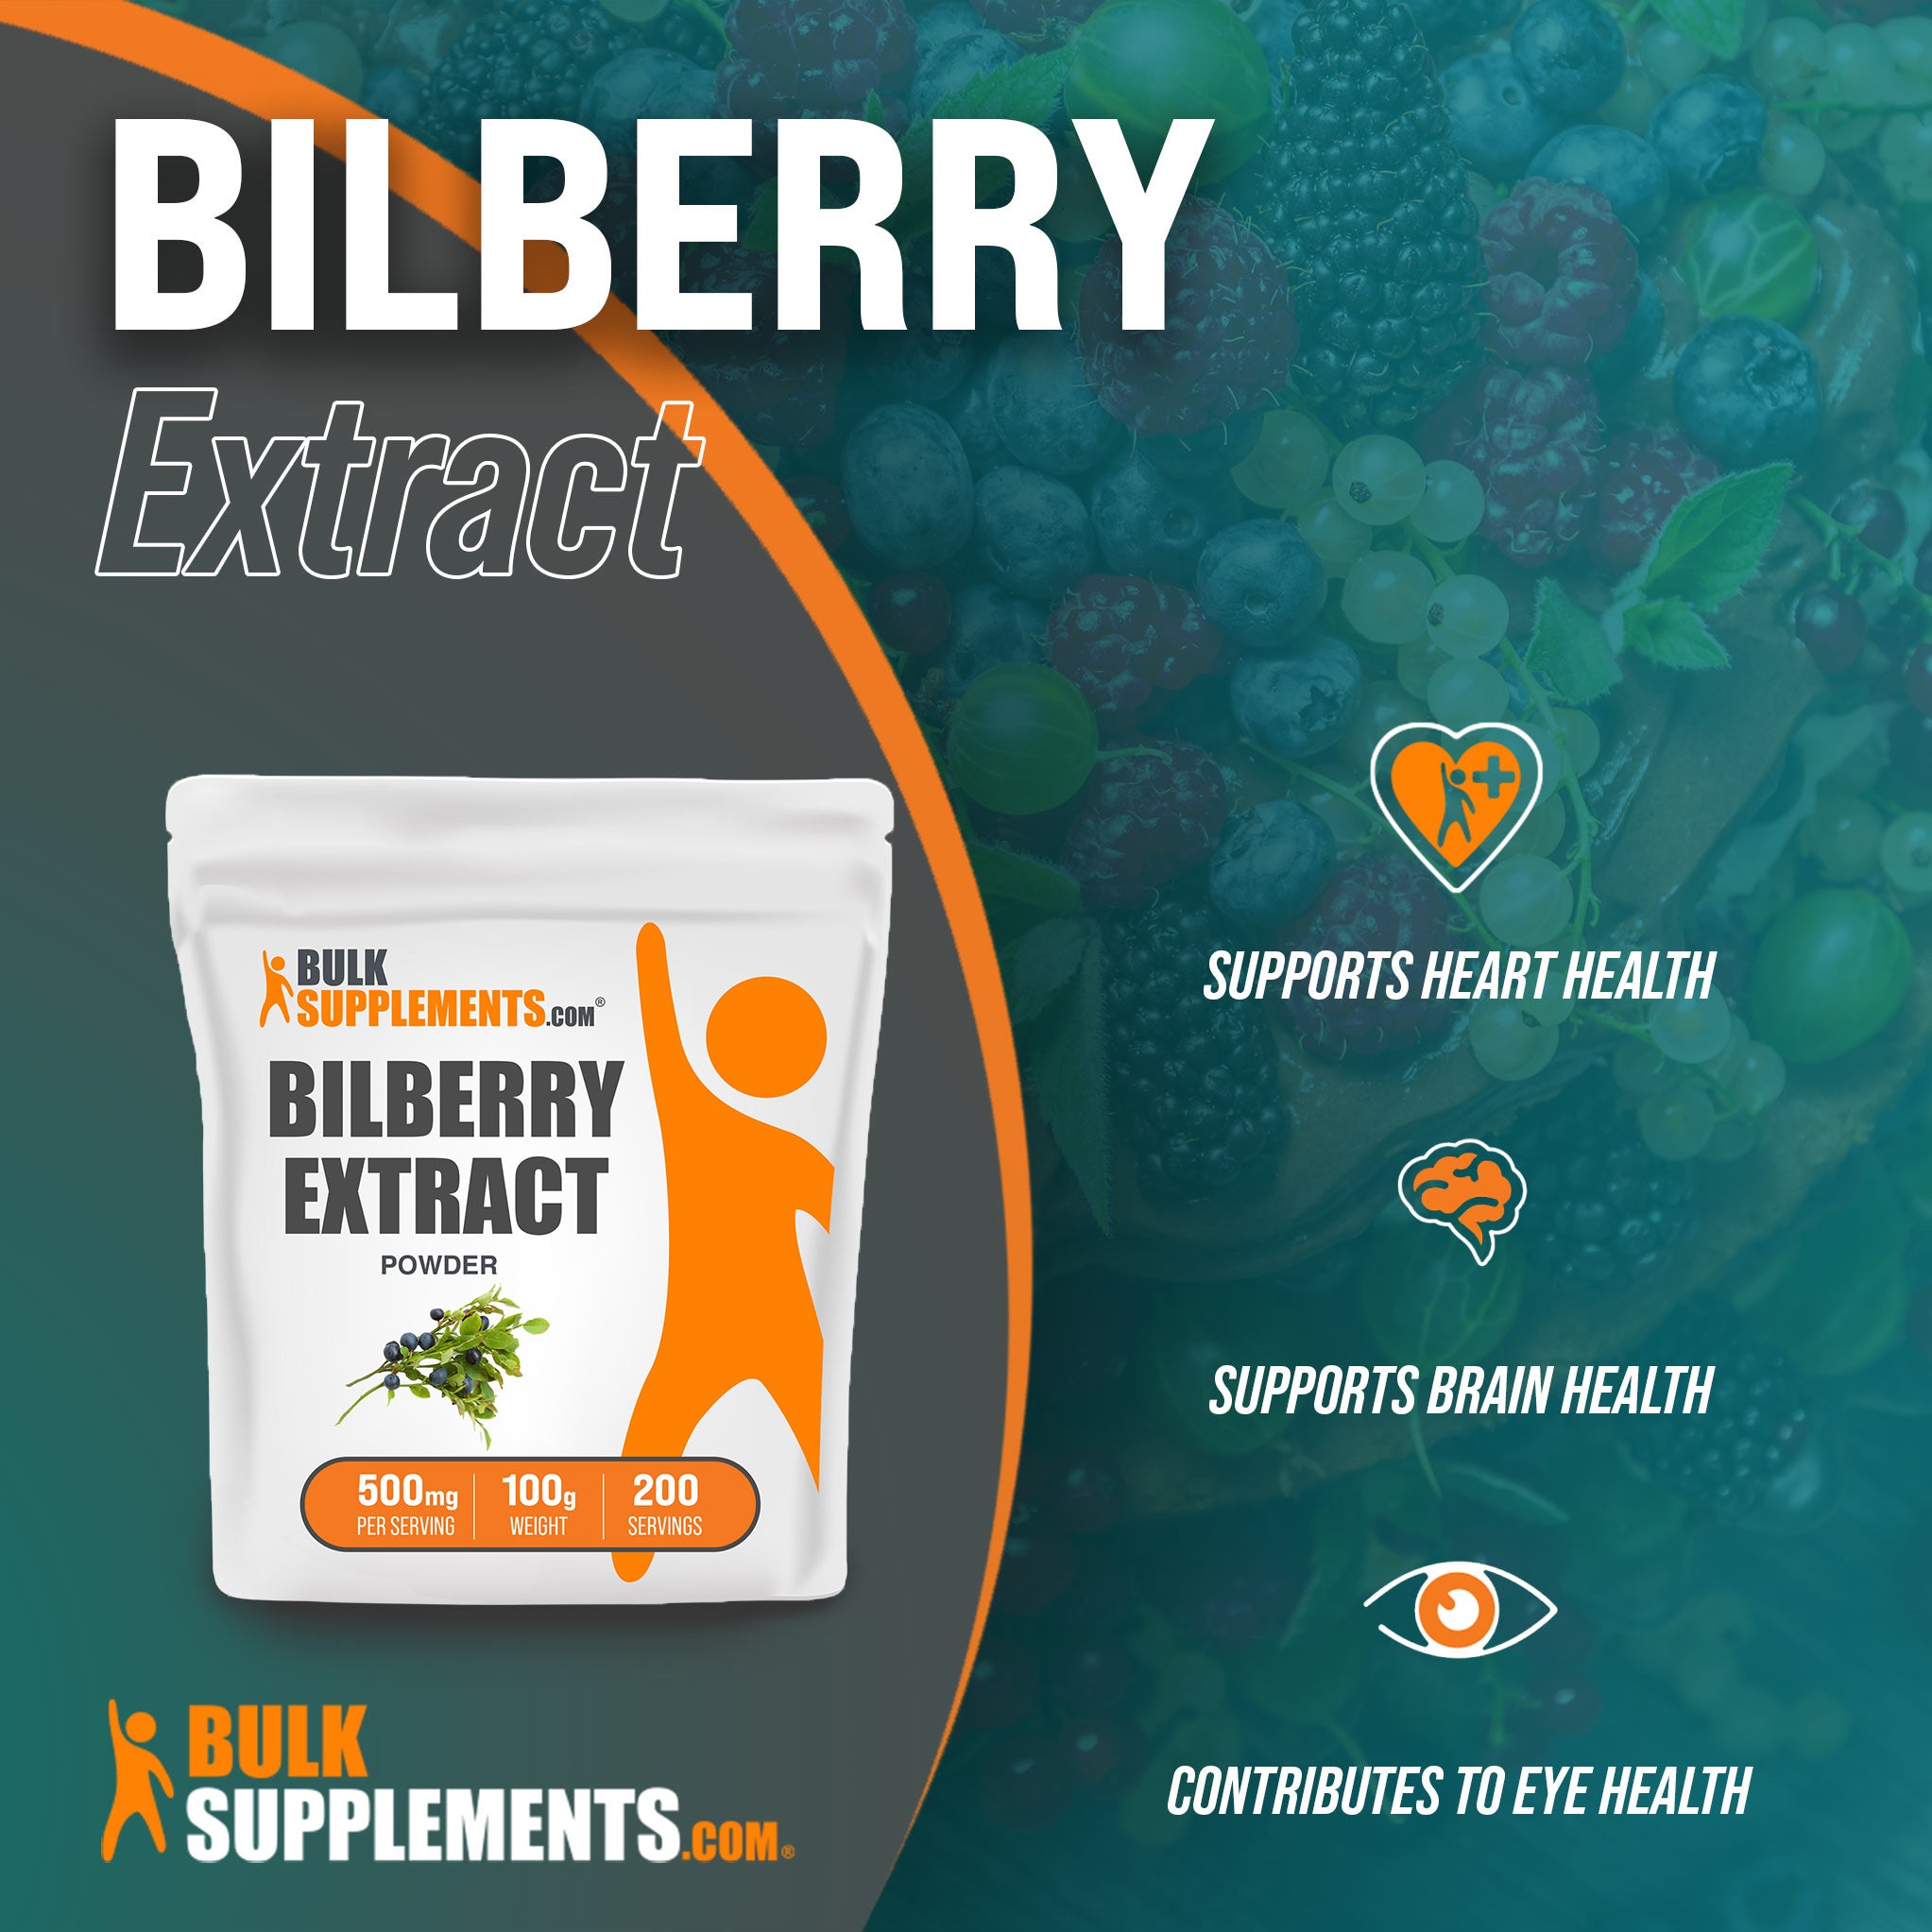 100g Bilberry Extract is an ideal eye supplement